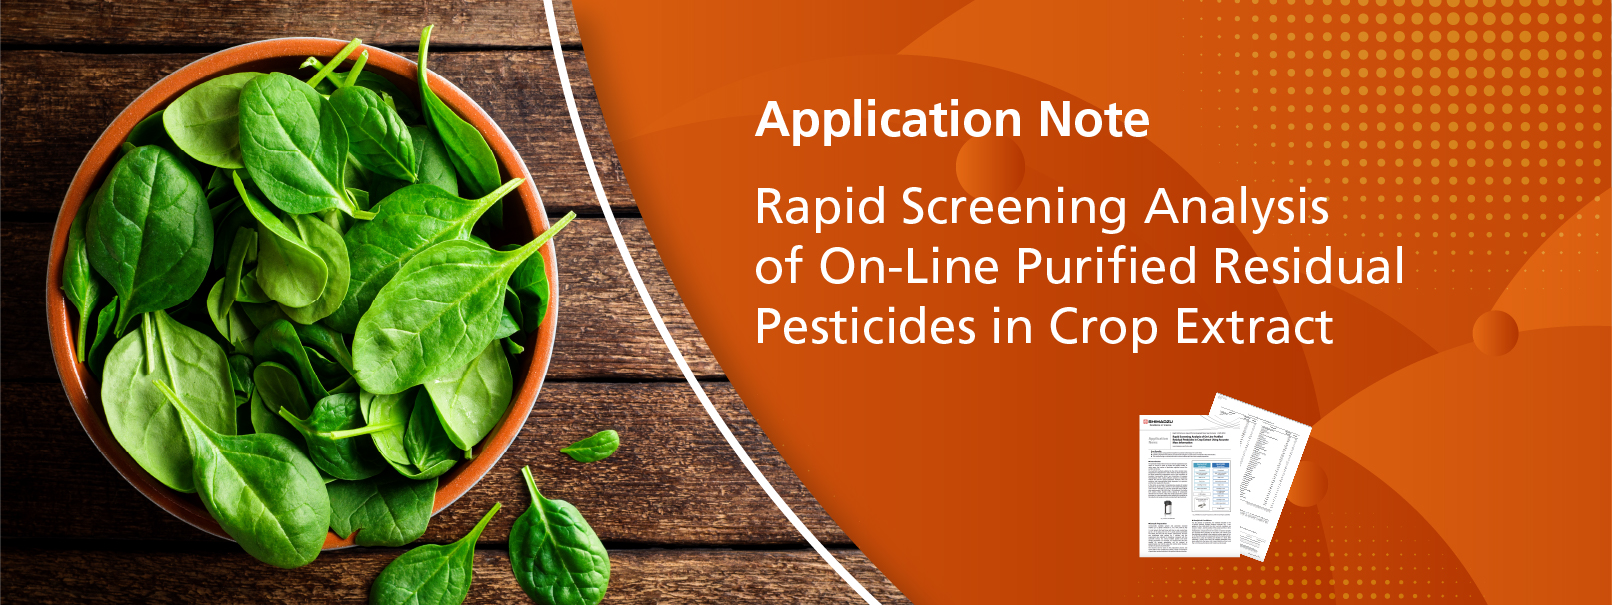 Rapid Screening Analysis of On-Line Purified Residual Pesticides in Crop Extract